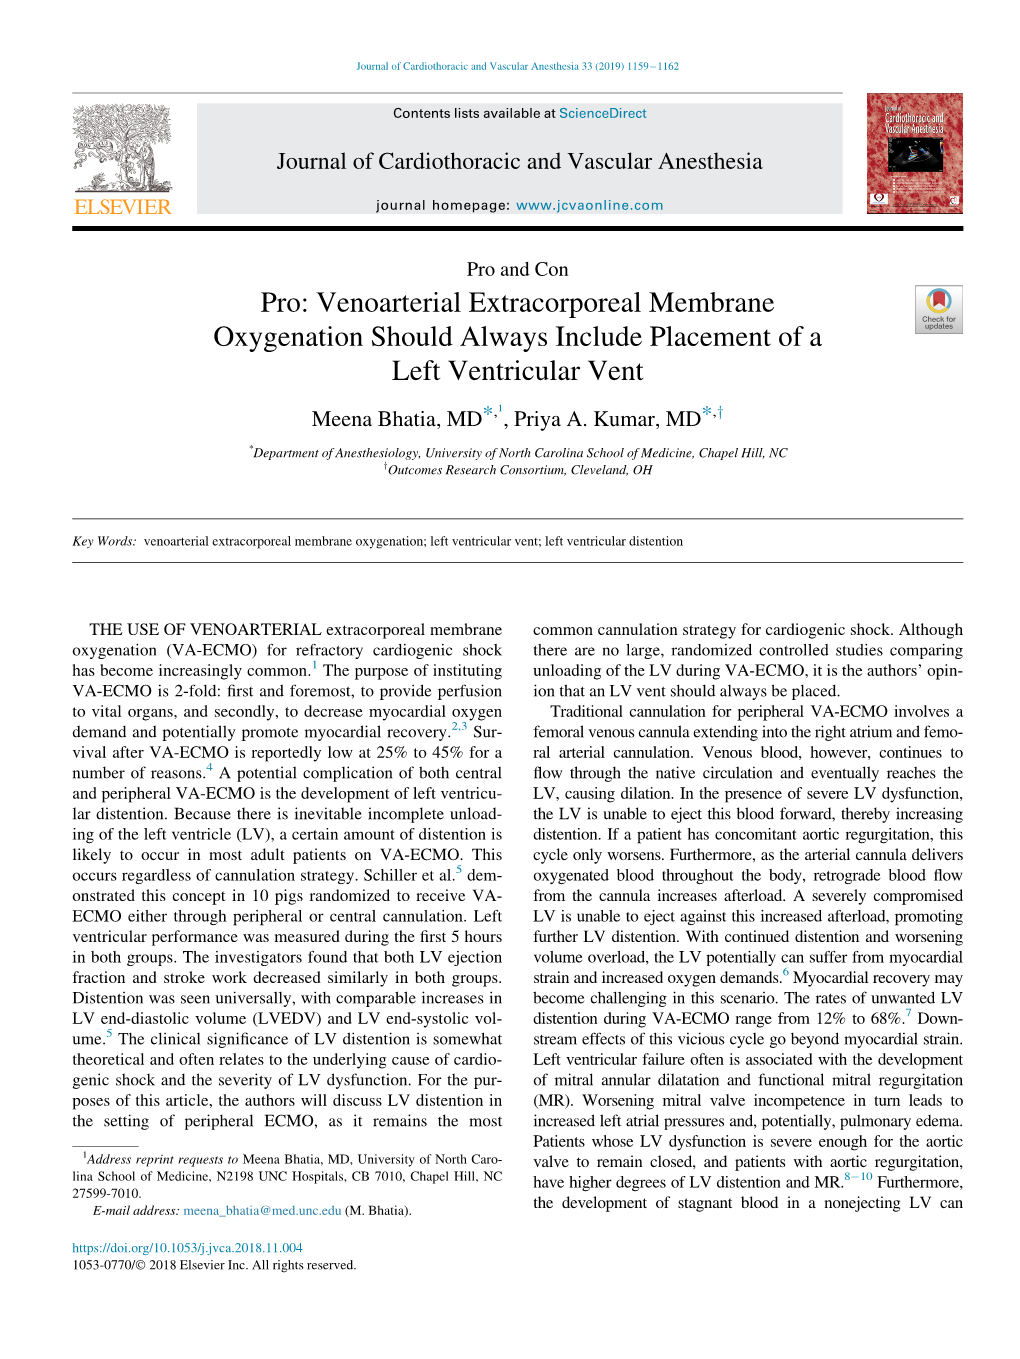 Pro: Venoarterial Extracorporeal Membrane Oxygenation Should Always Include Placement of a Left Ventricular Vent